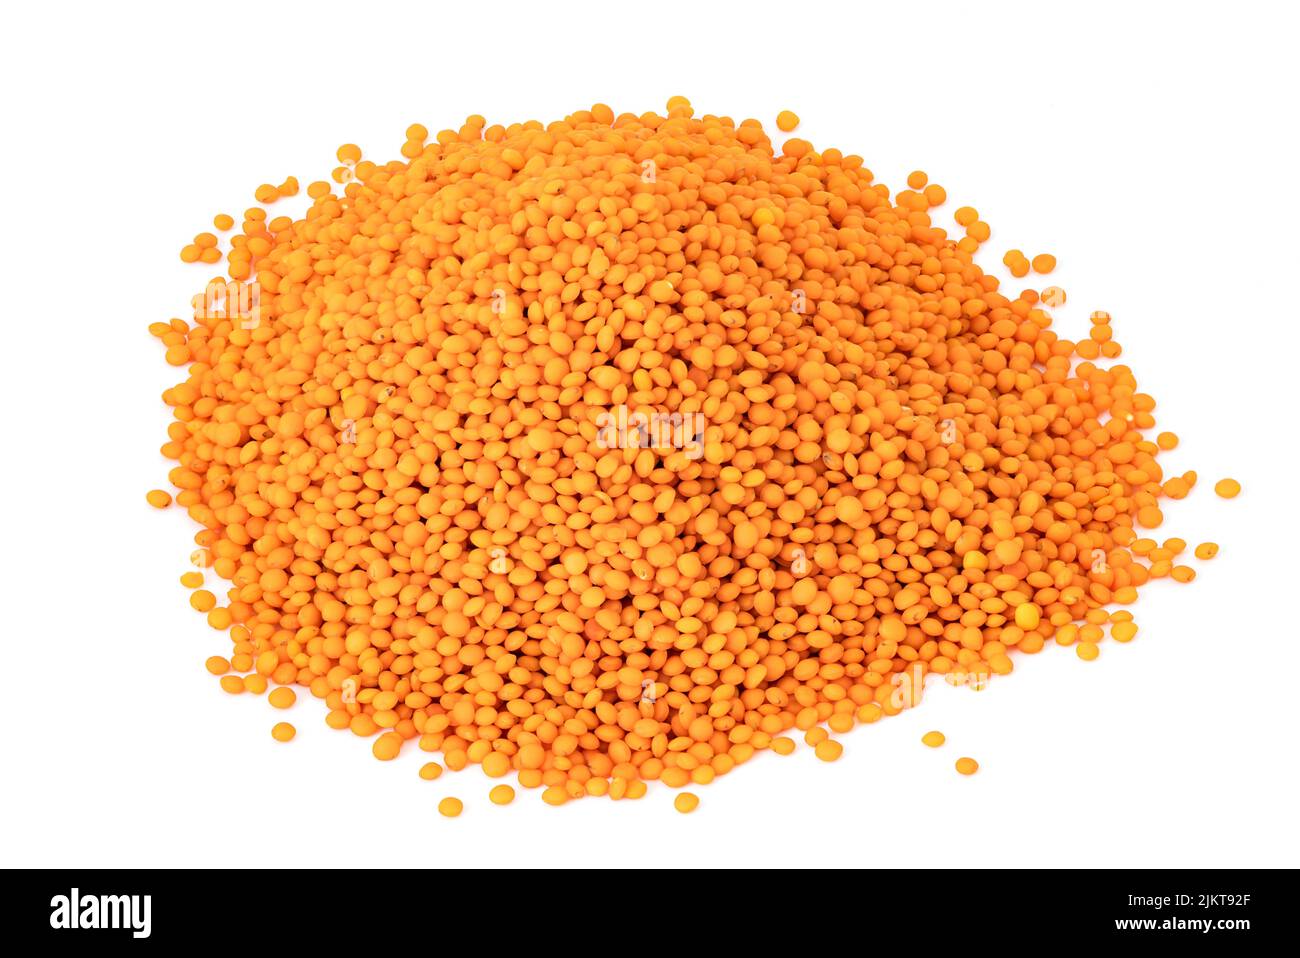 Pile or heap of red lentils isolated on white background. Helthy food reach with proteins. Agriculture harvest and diet concept Stock Photo